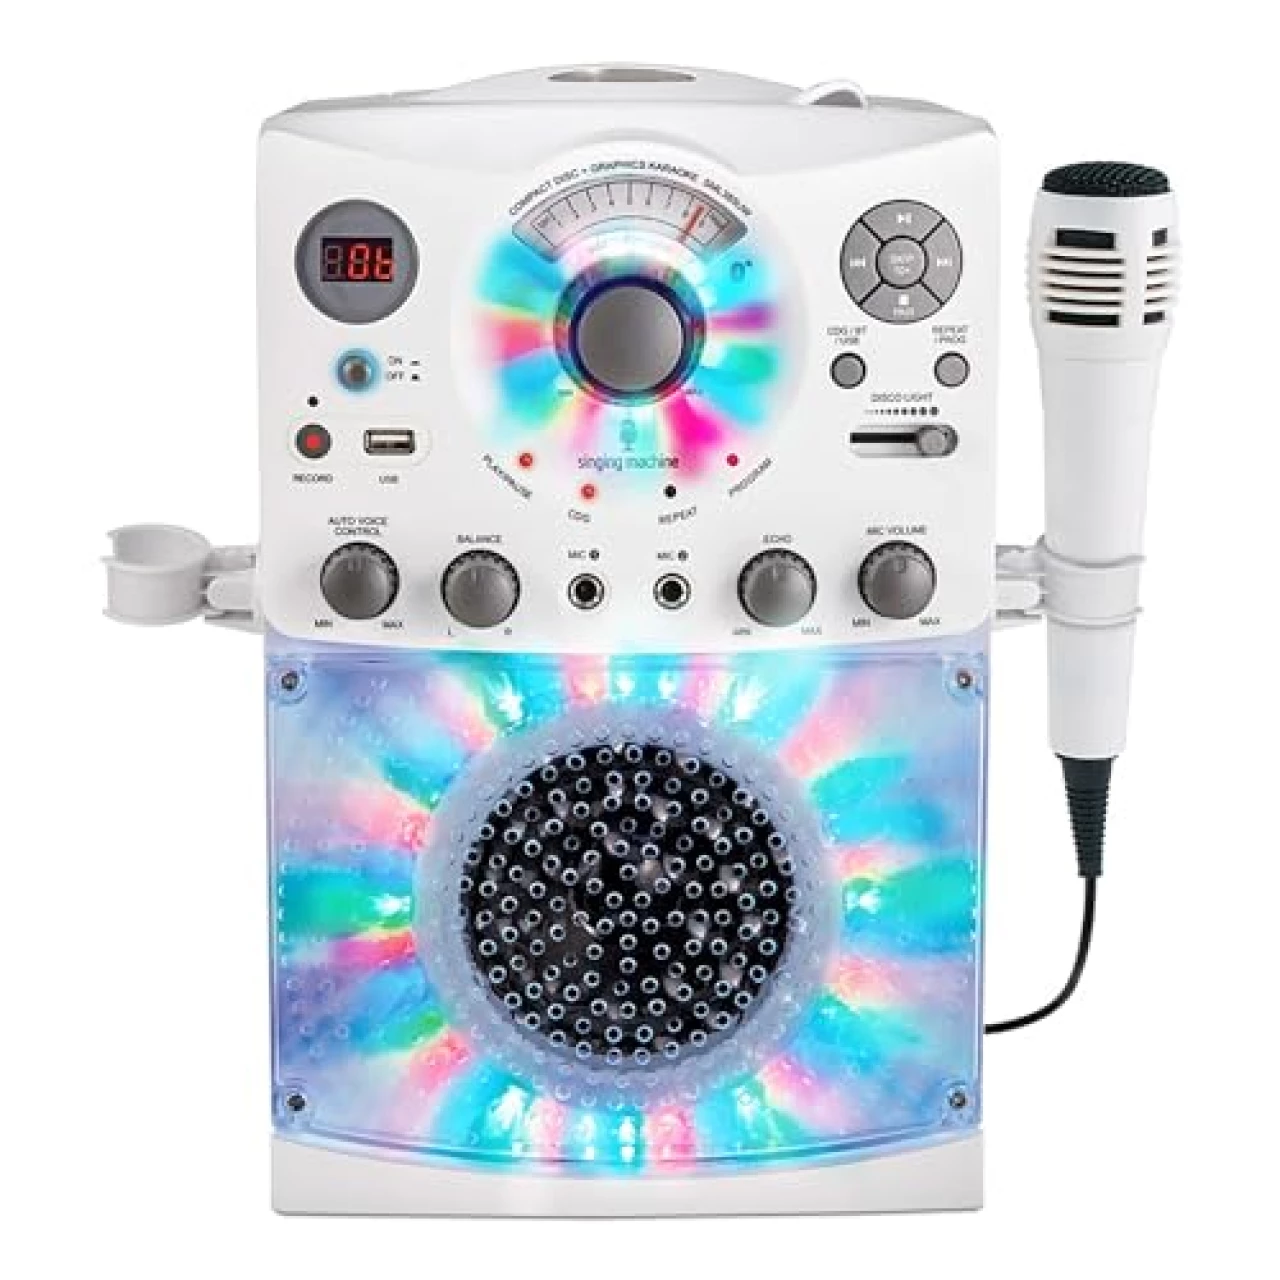 Singing Machine Portable Karaoke Machine for Adults &amp; Kids with Wired Microphone, White - Built-In Speaker, Bluetooth with LED Disco Lights - Karaoke System with CD+G Player &amp; USB Connectivity